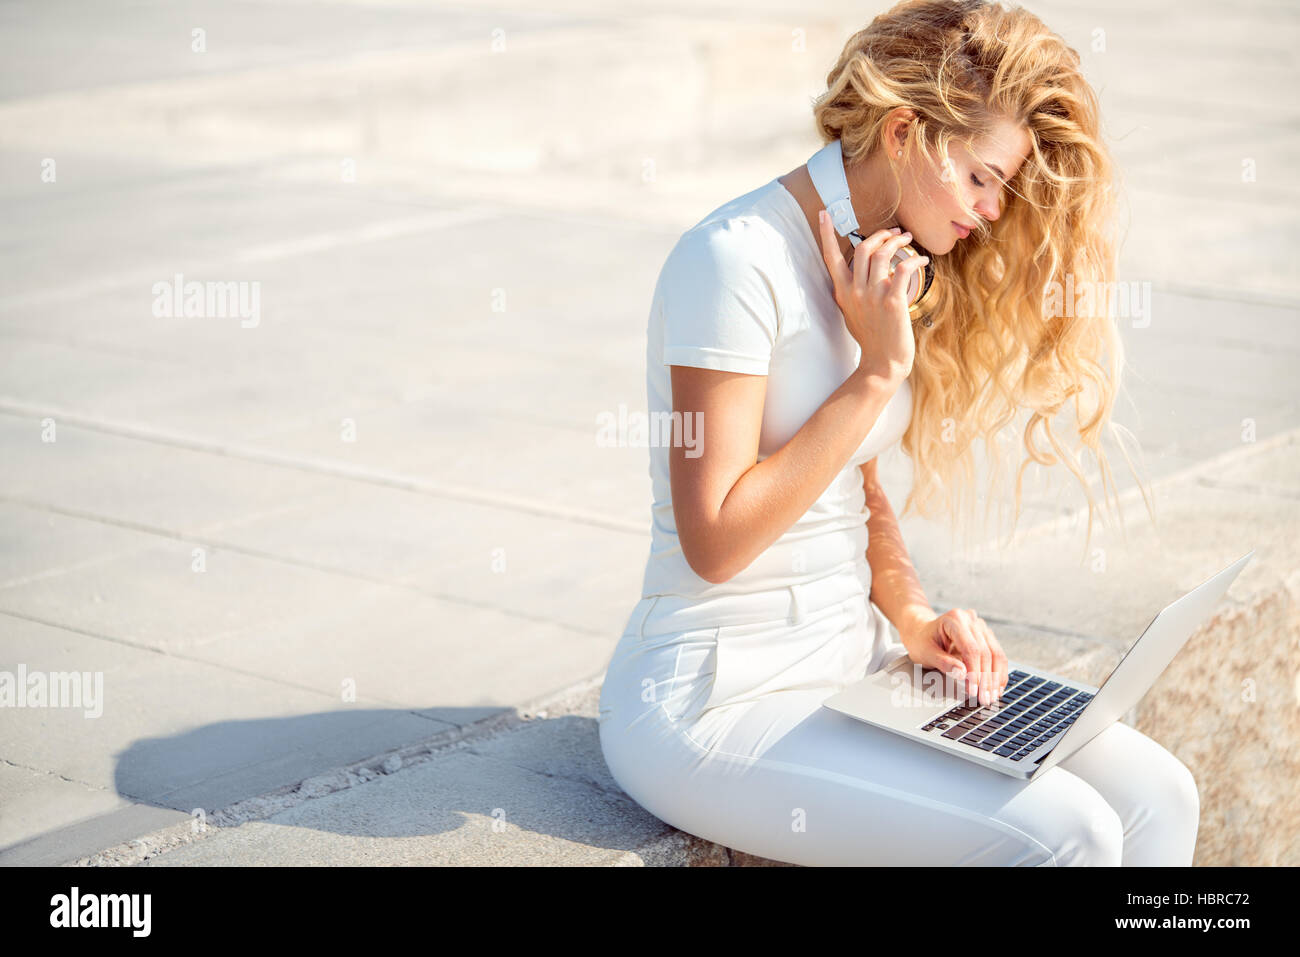 Searching for music. Stock Photo